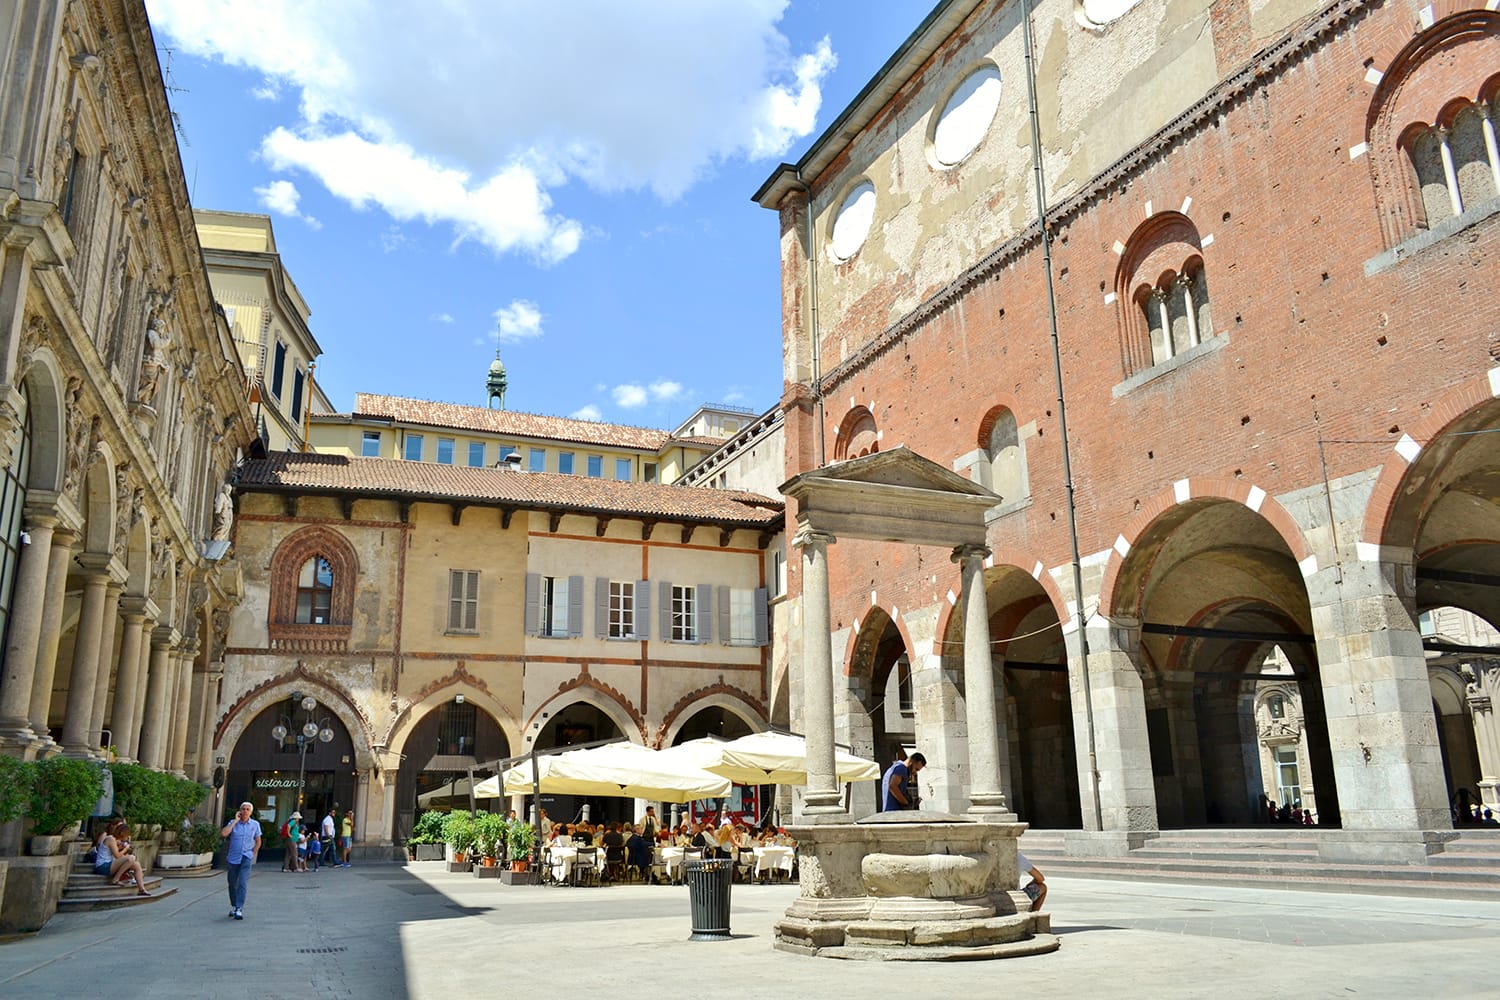 Medieval stunning outlook to an ancient architecture of the Mercanti square in Milan, Italy